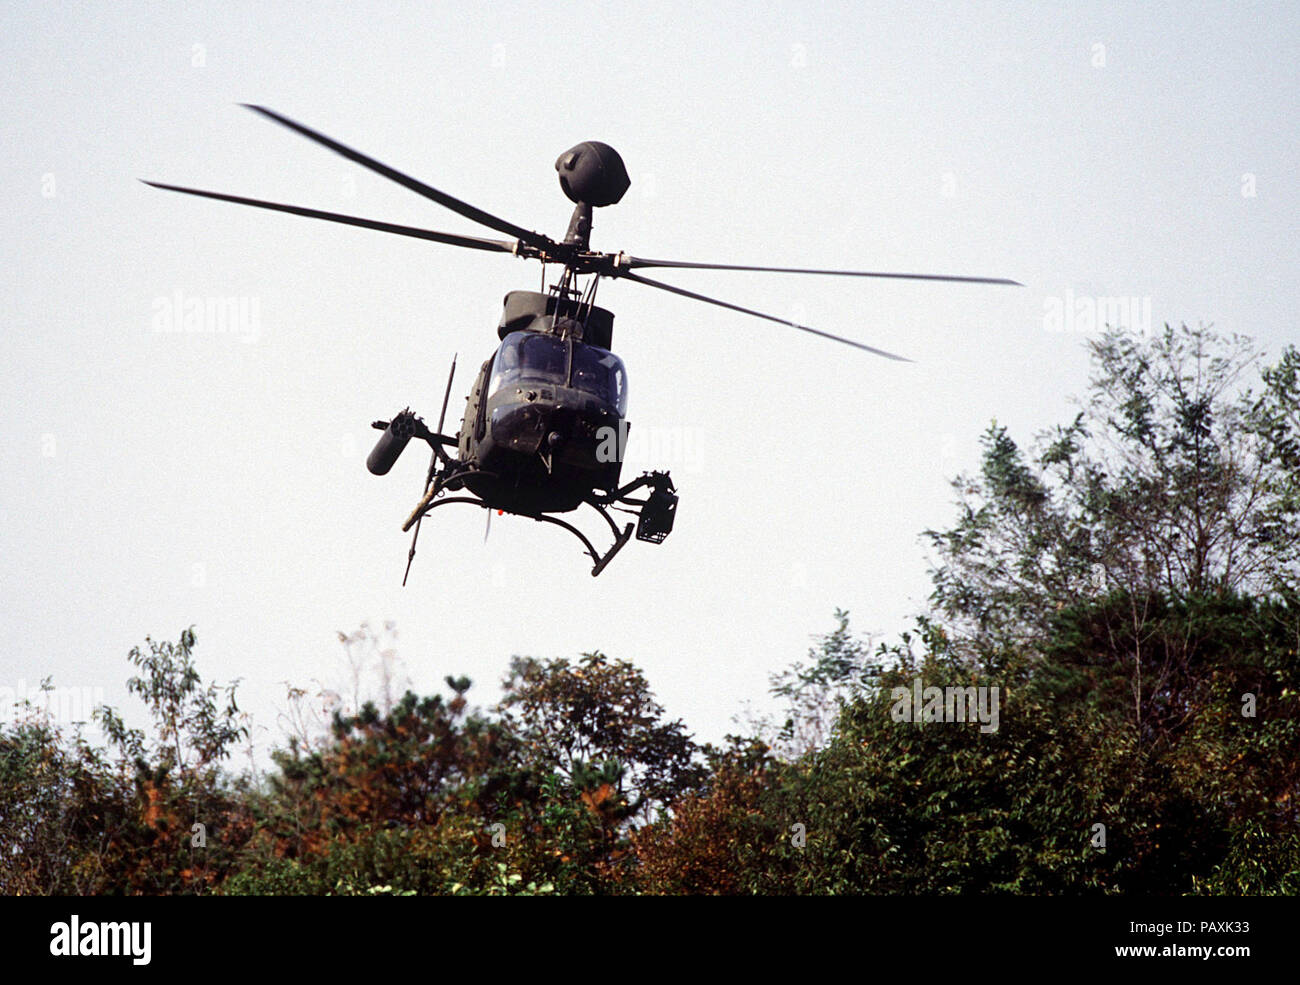 A US Army OH-58D helicopter with the 4th Squadron, 7th Cavalry Regiment hovers over the tree tops as it prepares to support armor belonging to C Troop of the 4-7 Cavalry during maneuvers and gunnery training at t(-3. A US Army OH-58D helicopter with the 4th Squadron, 7th  Cavalry Regiment hovers over the tree tops as it prepares to support armor belonging to C Troop of the 4-7 Cavalry during maneuvers and gunnery training at the Korea Training Center, Republic of Korea on Oct. 25, 1998.  The center is manned throughout the year and various armored units rotate through training scenarios to mee Stock Photo